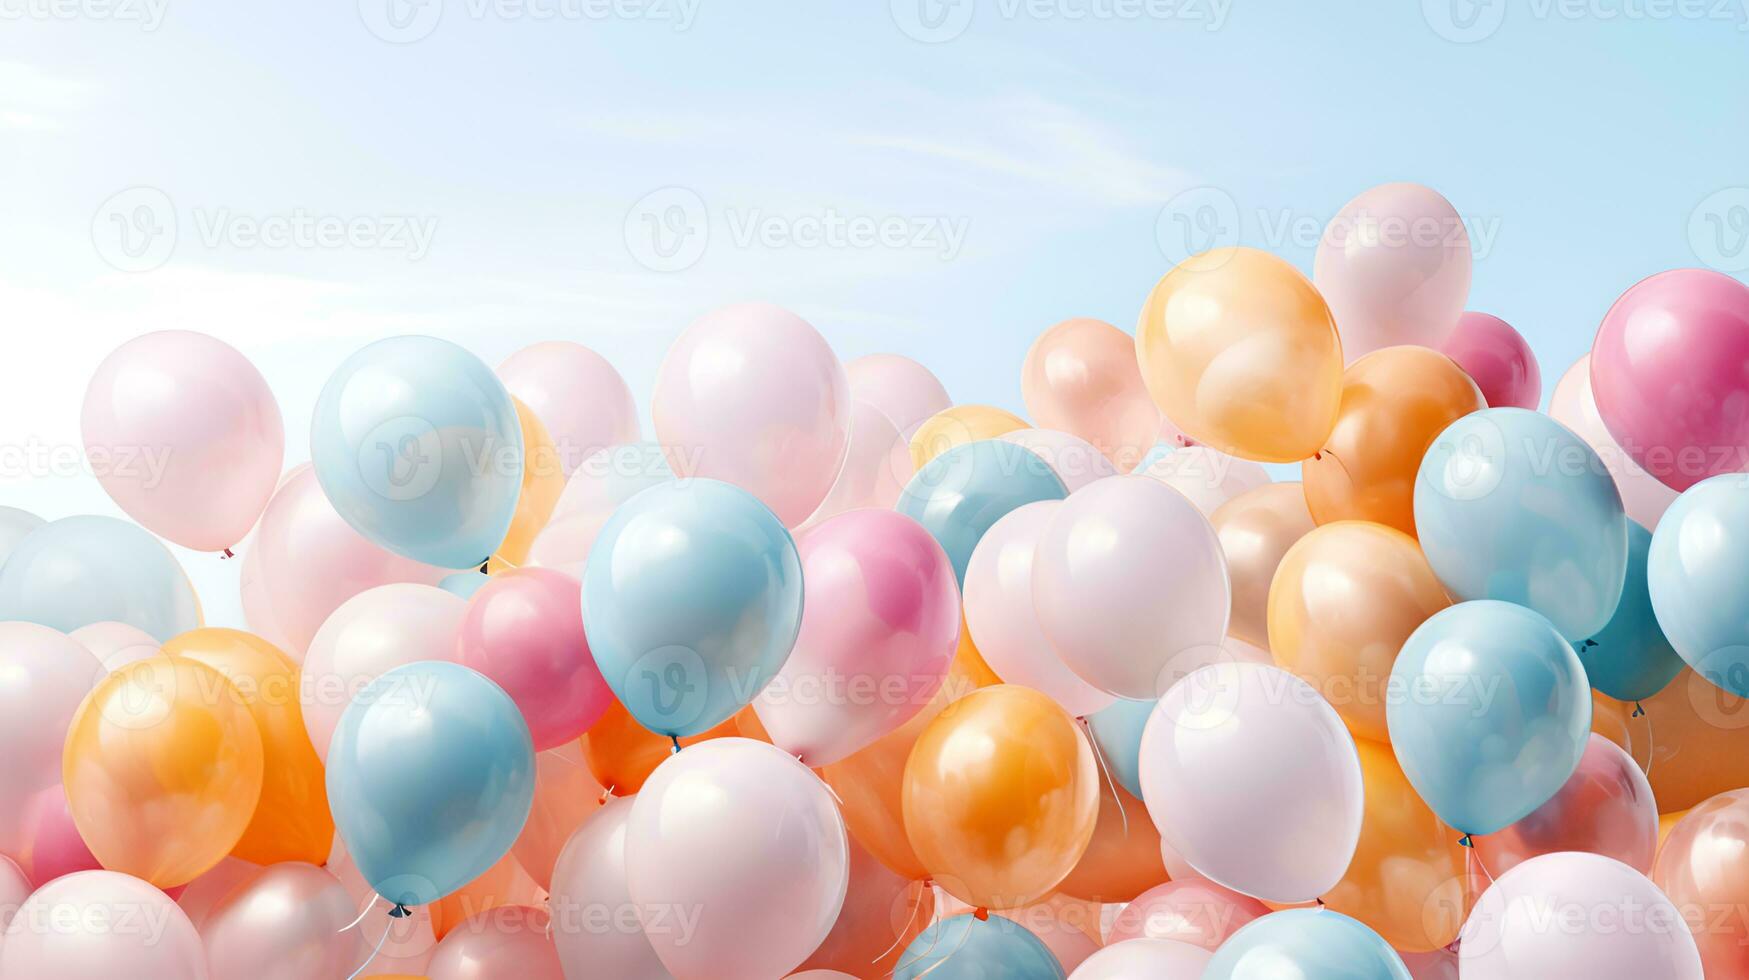 colorful party balloons in pastel colors photo